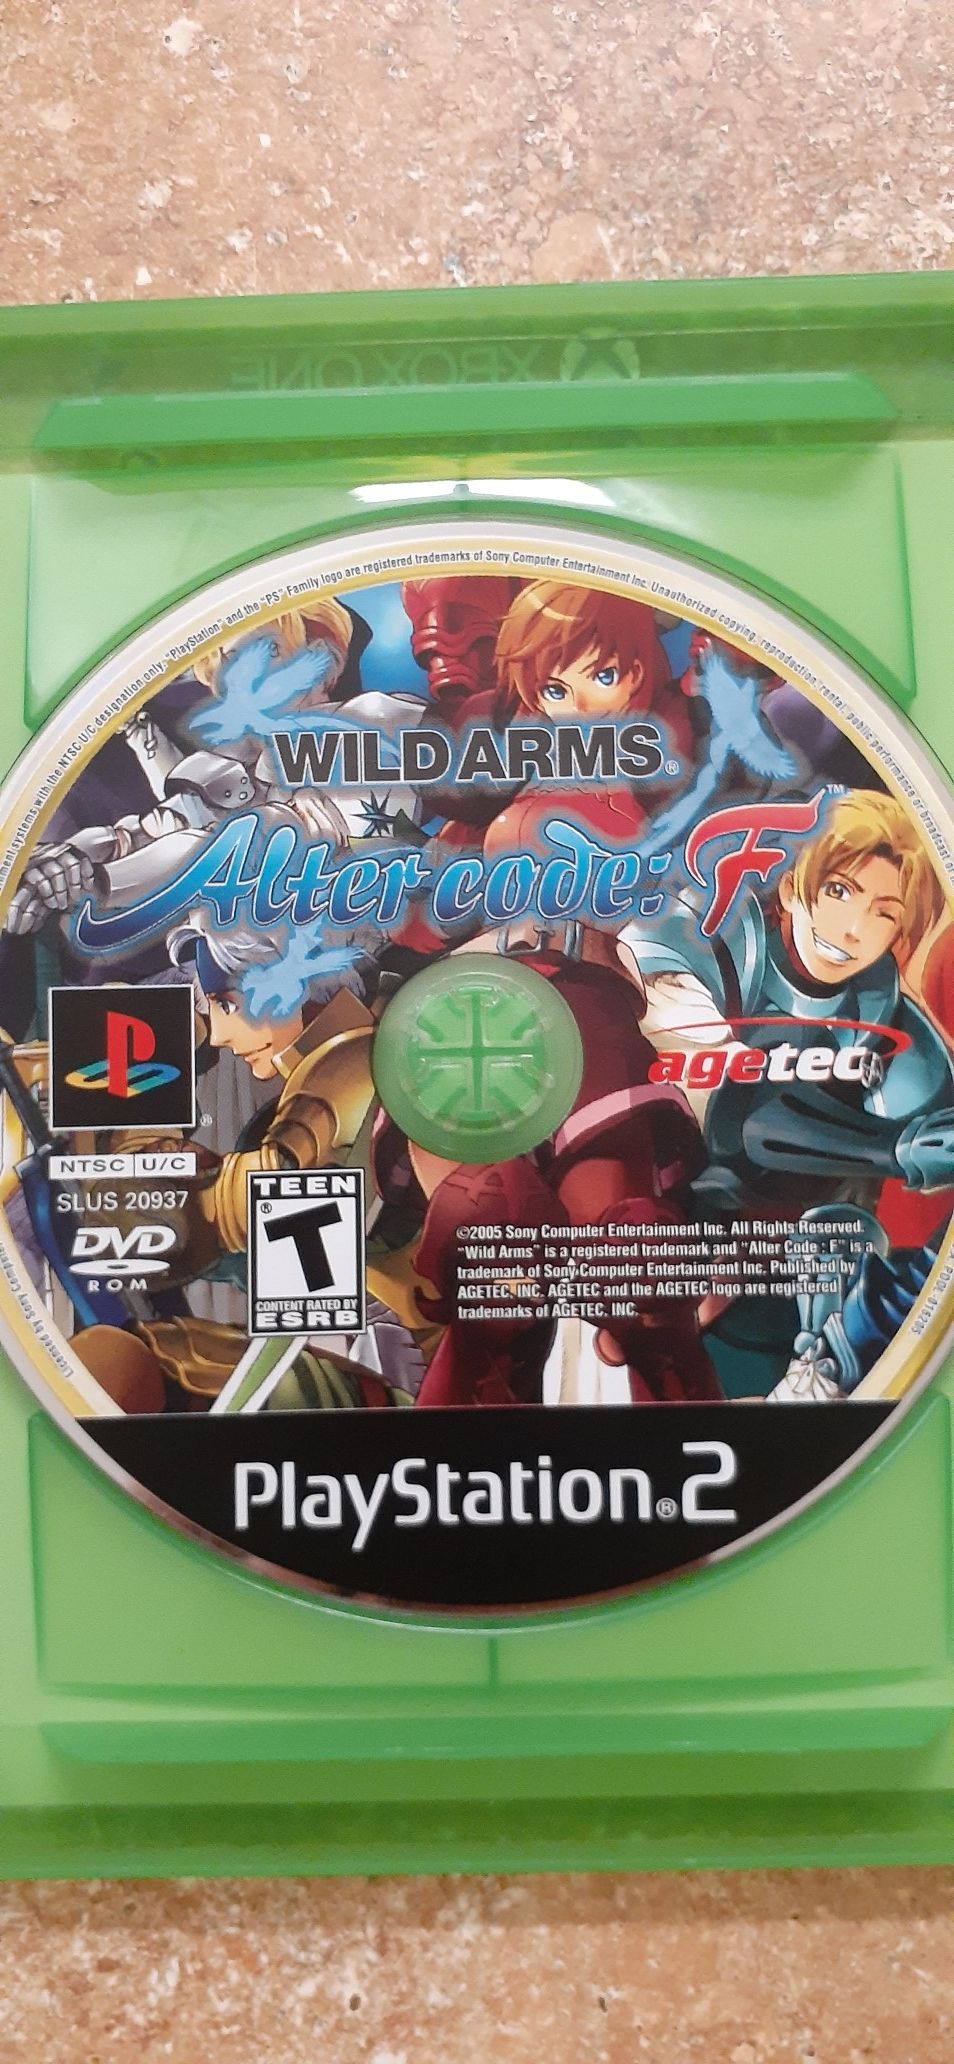 Wild Arms-Alter Code F (PS2) $65 or best offer